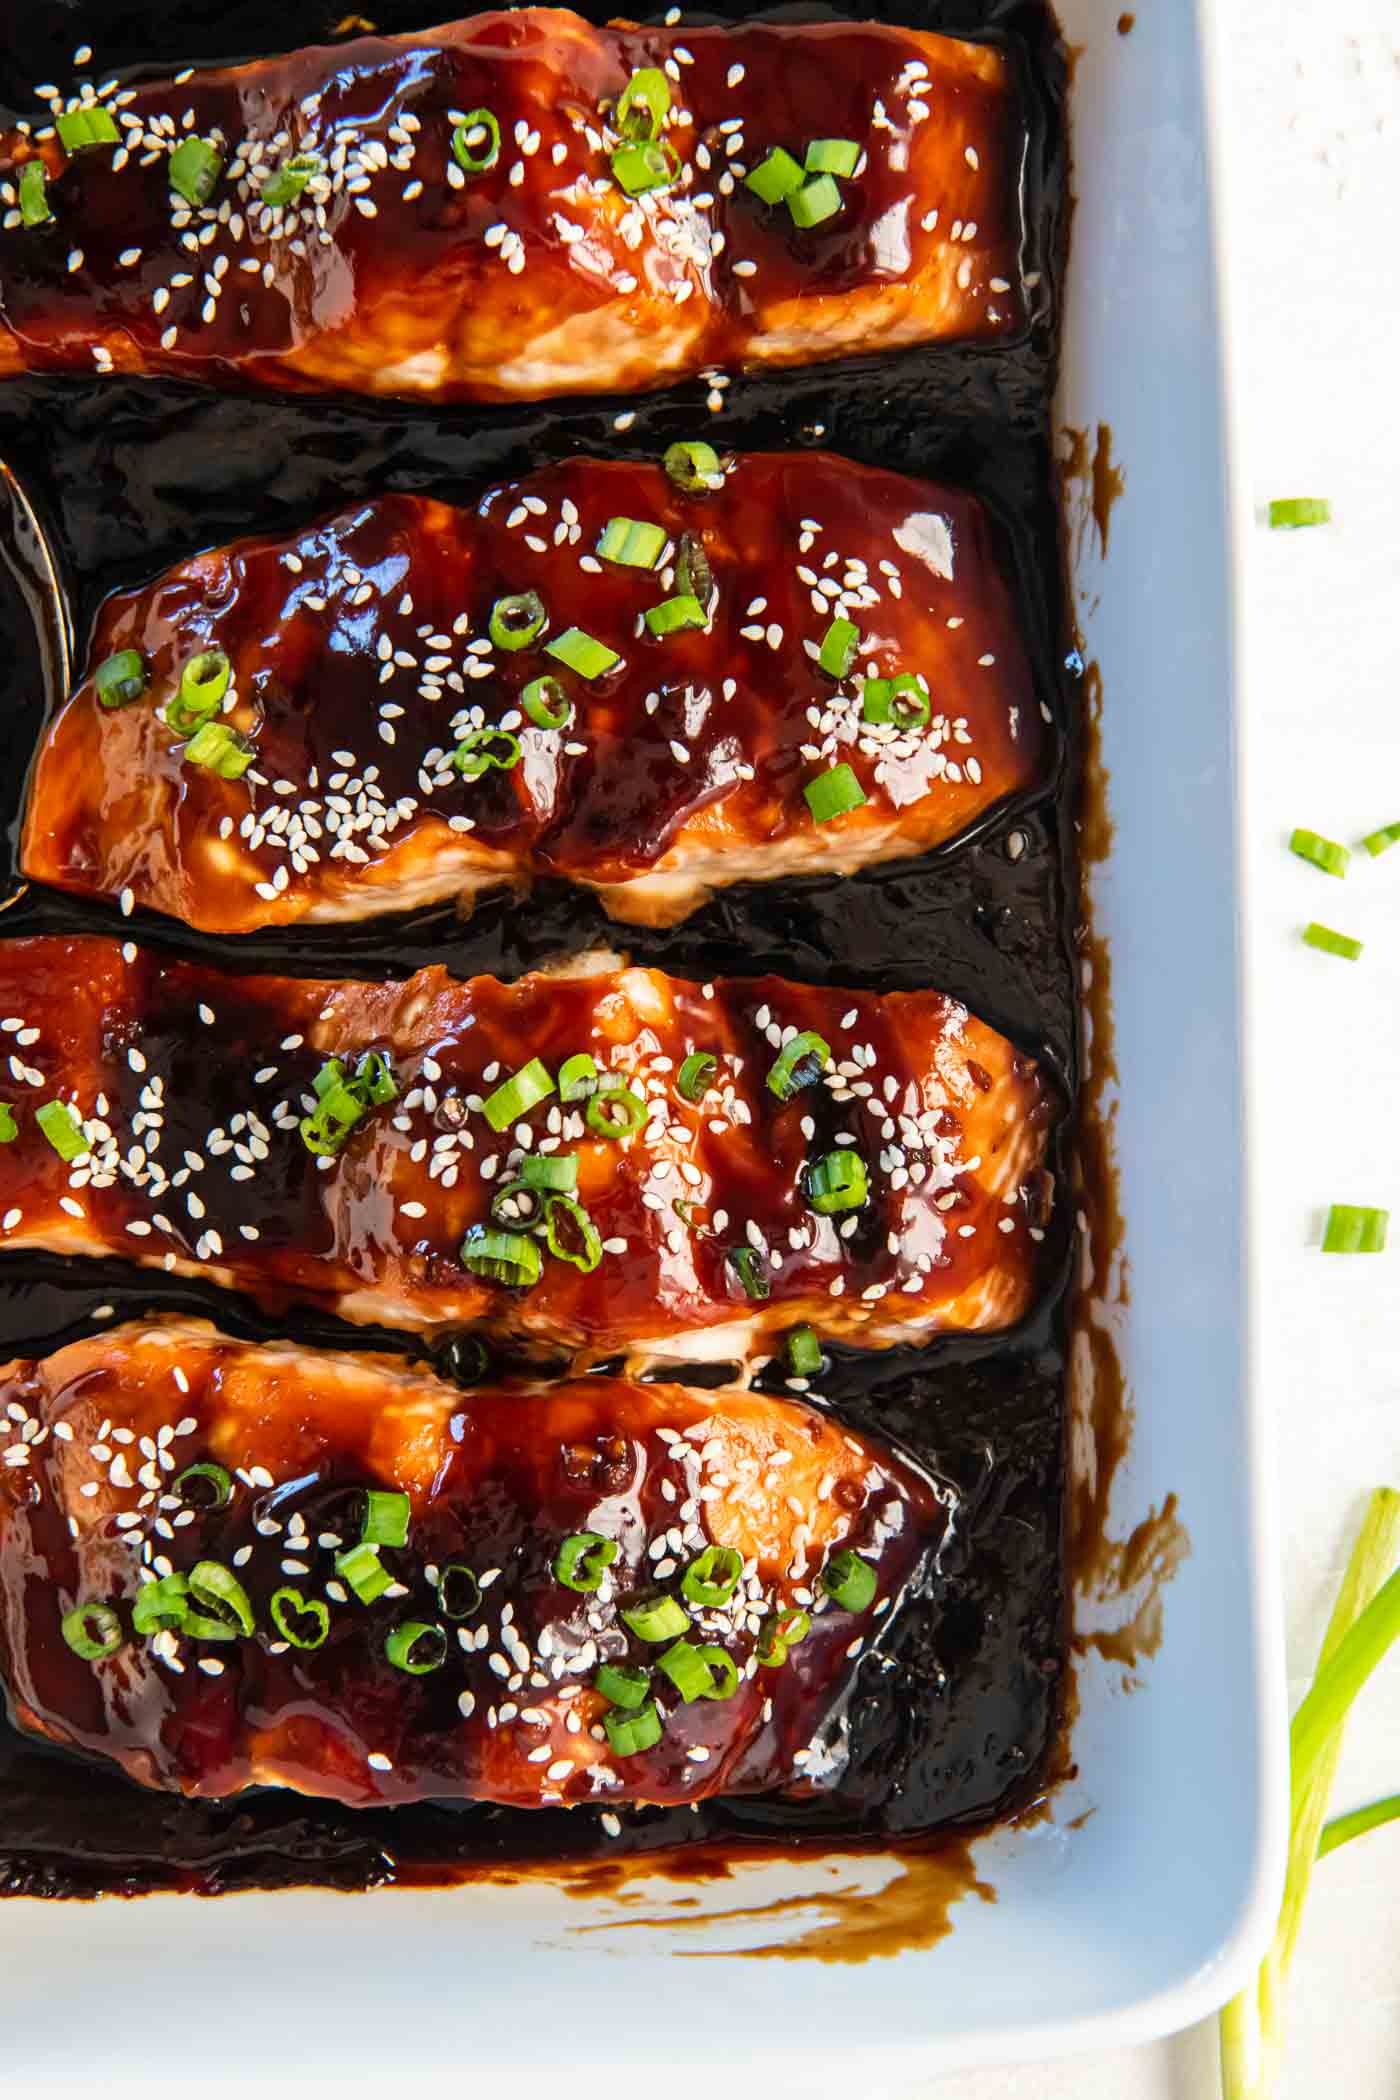 Four fillets of baked teriyaki salmon garnished with green onions and sesame seeds in a baking dish.